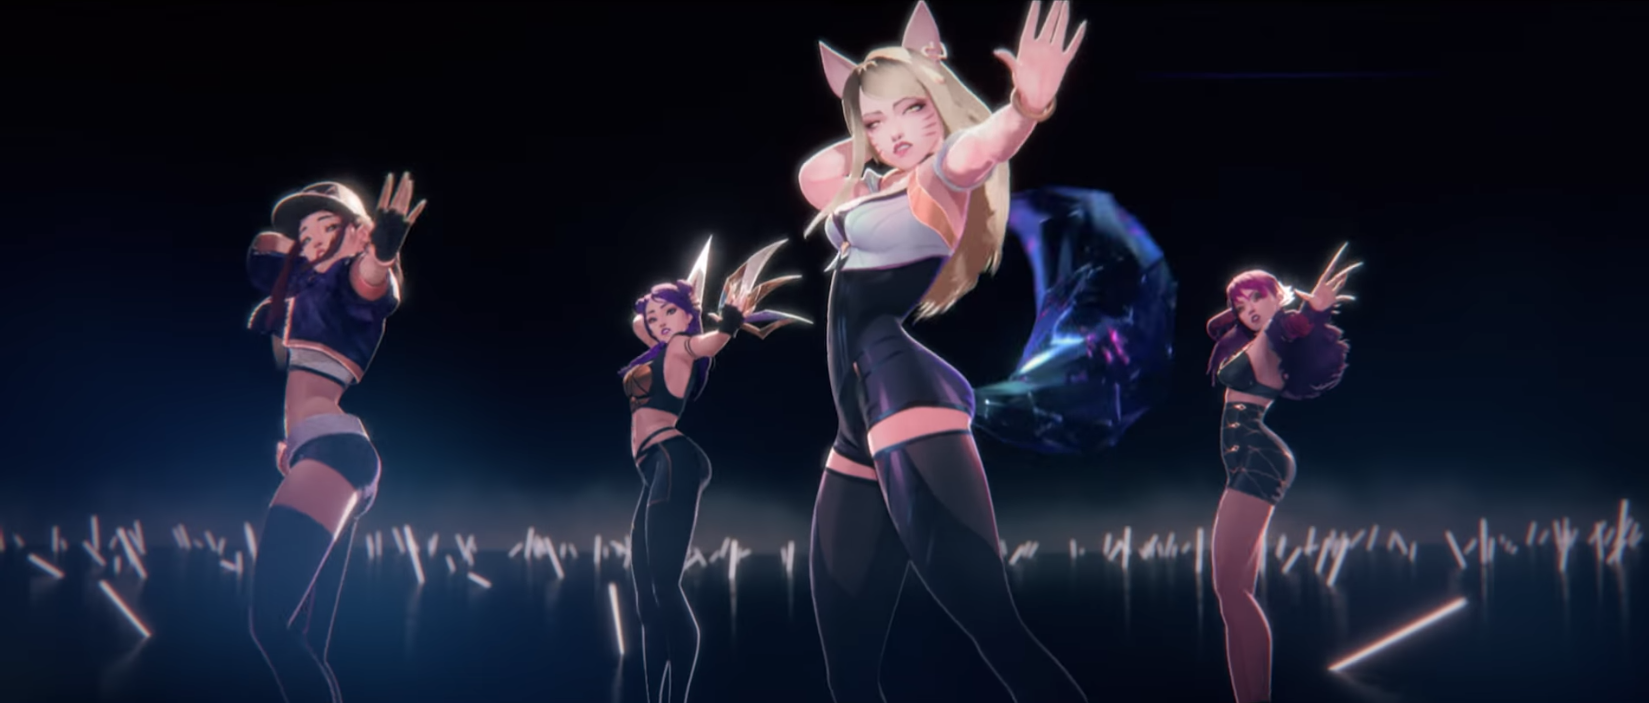 These K/DA skins for which Riot says, "we want to make sure you have everything you need to make all your popstar dreams come true" are probably not making women feel any more at ease